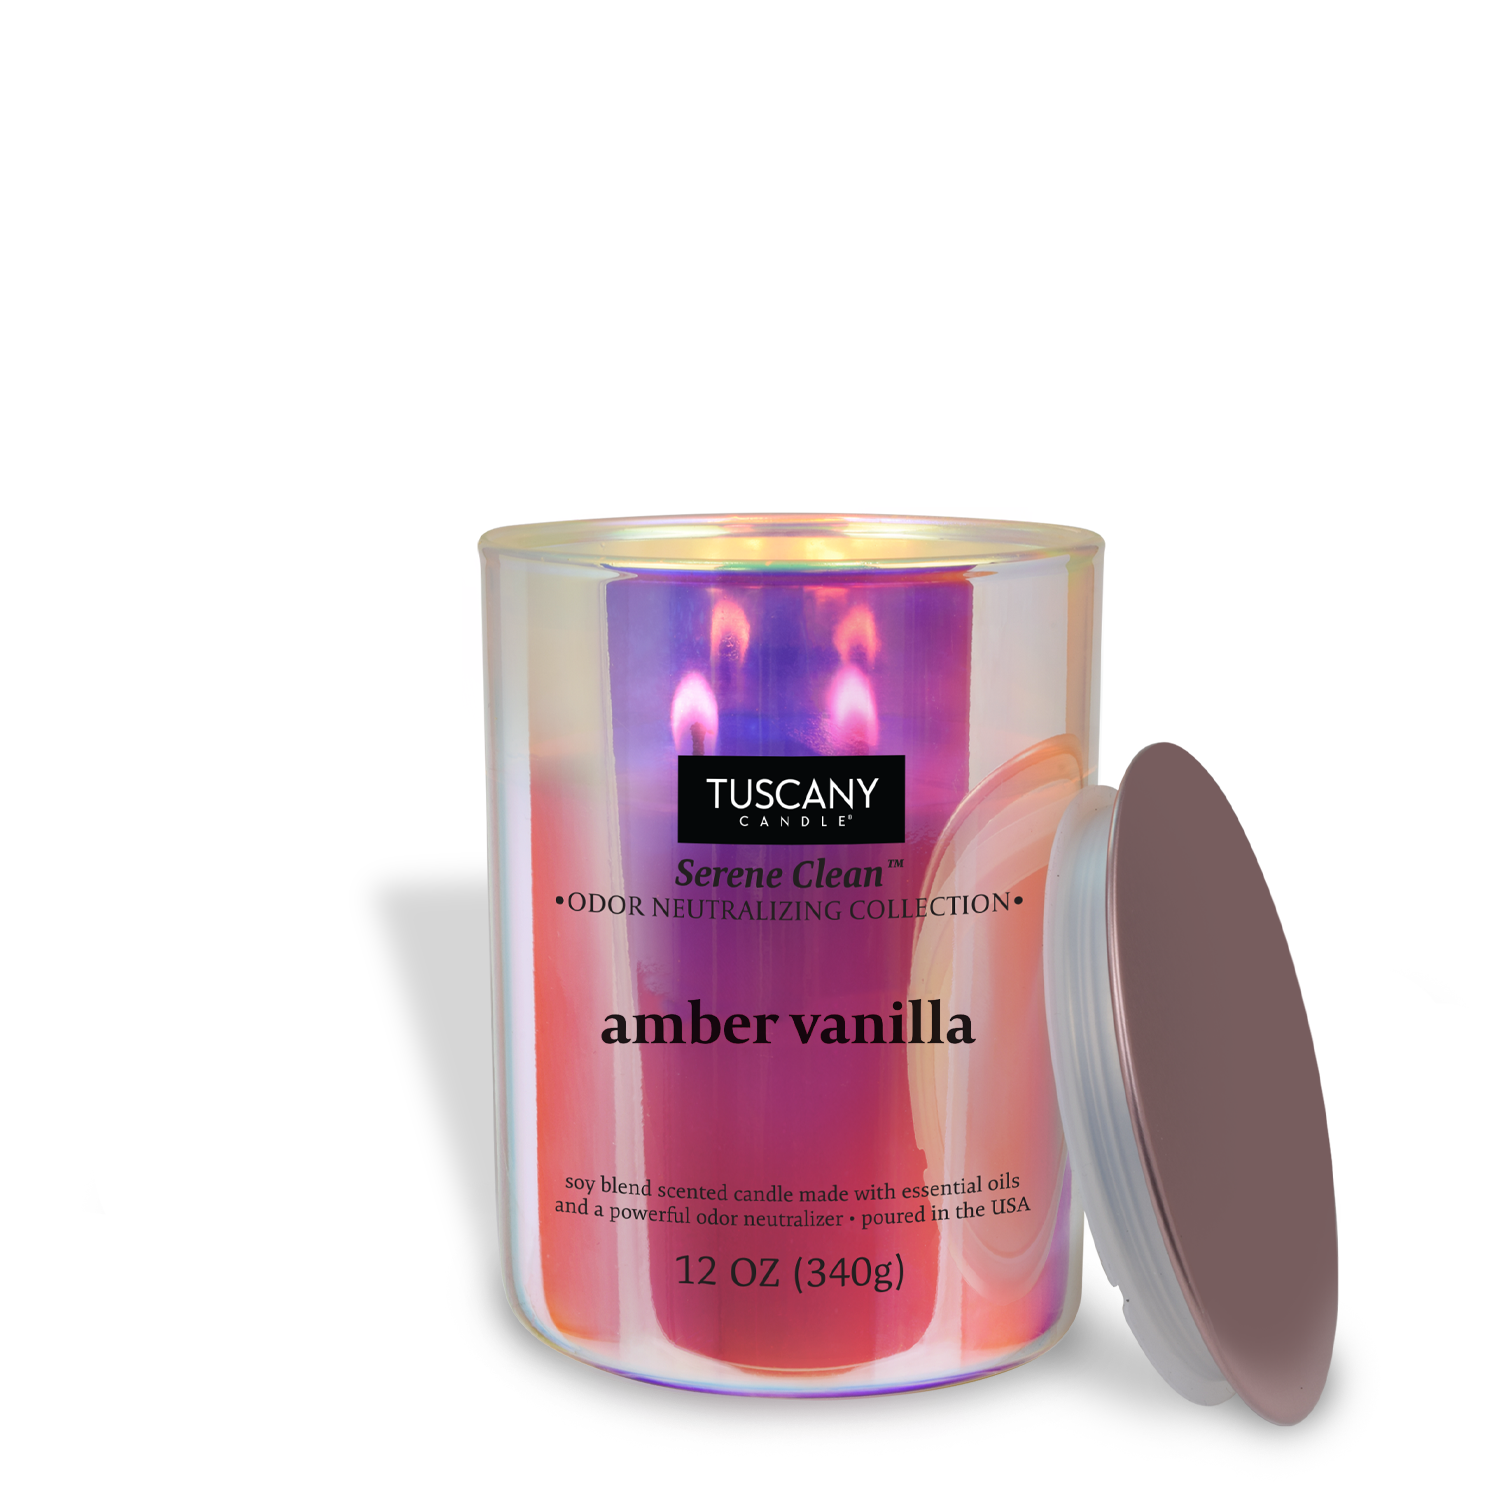 Tuscany Candle® EVD Amber Vanilla Scented Jar Candle (12 oz) – Serene Clean Collection